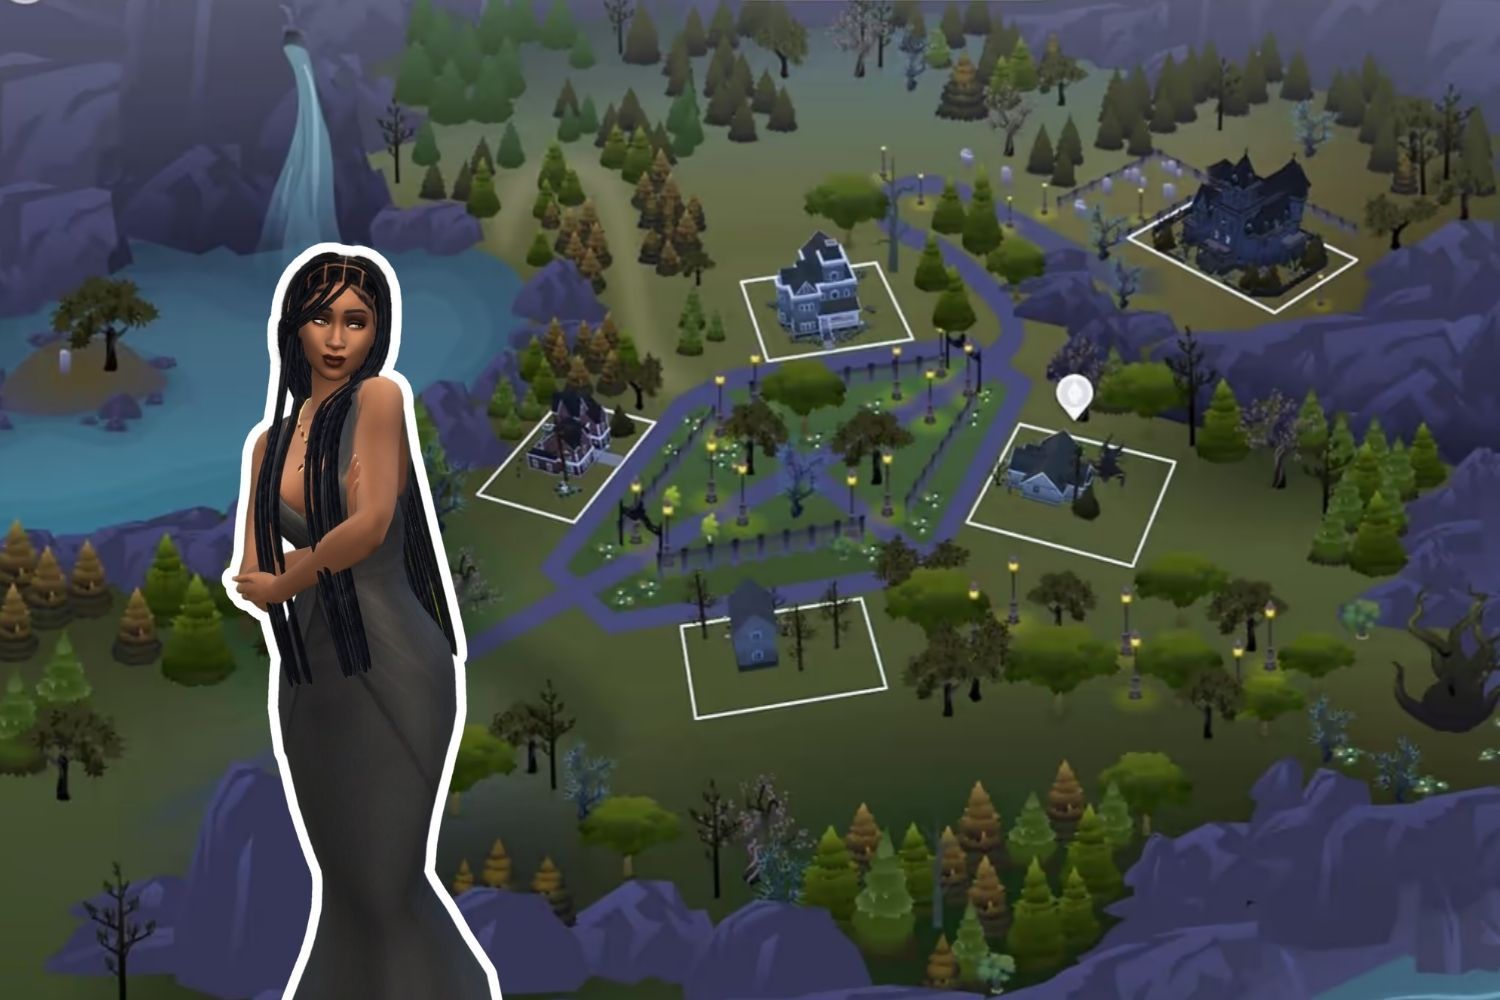 In a black formal dress and dark makeup, the Sim we have seen in the other photos has a sultry look as she stands against a map of Forgotten Hollow.